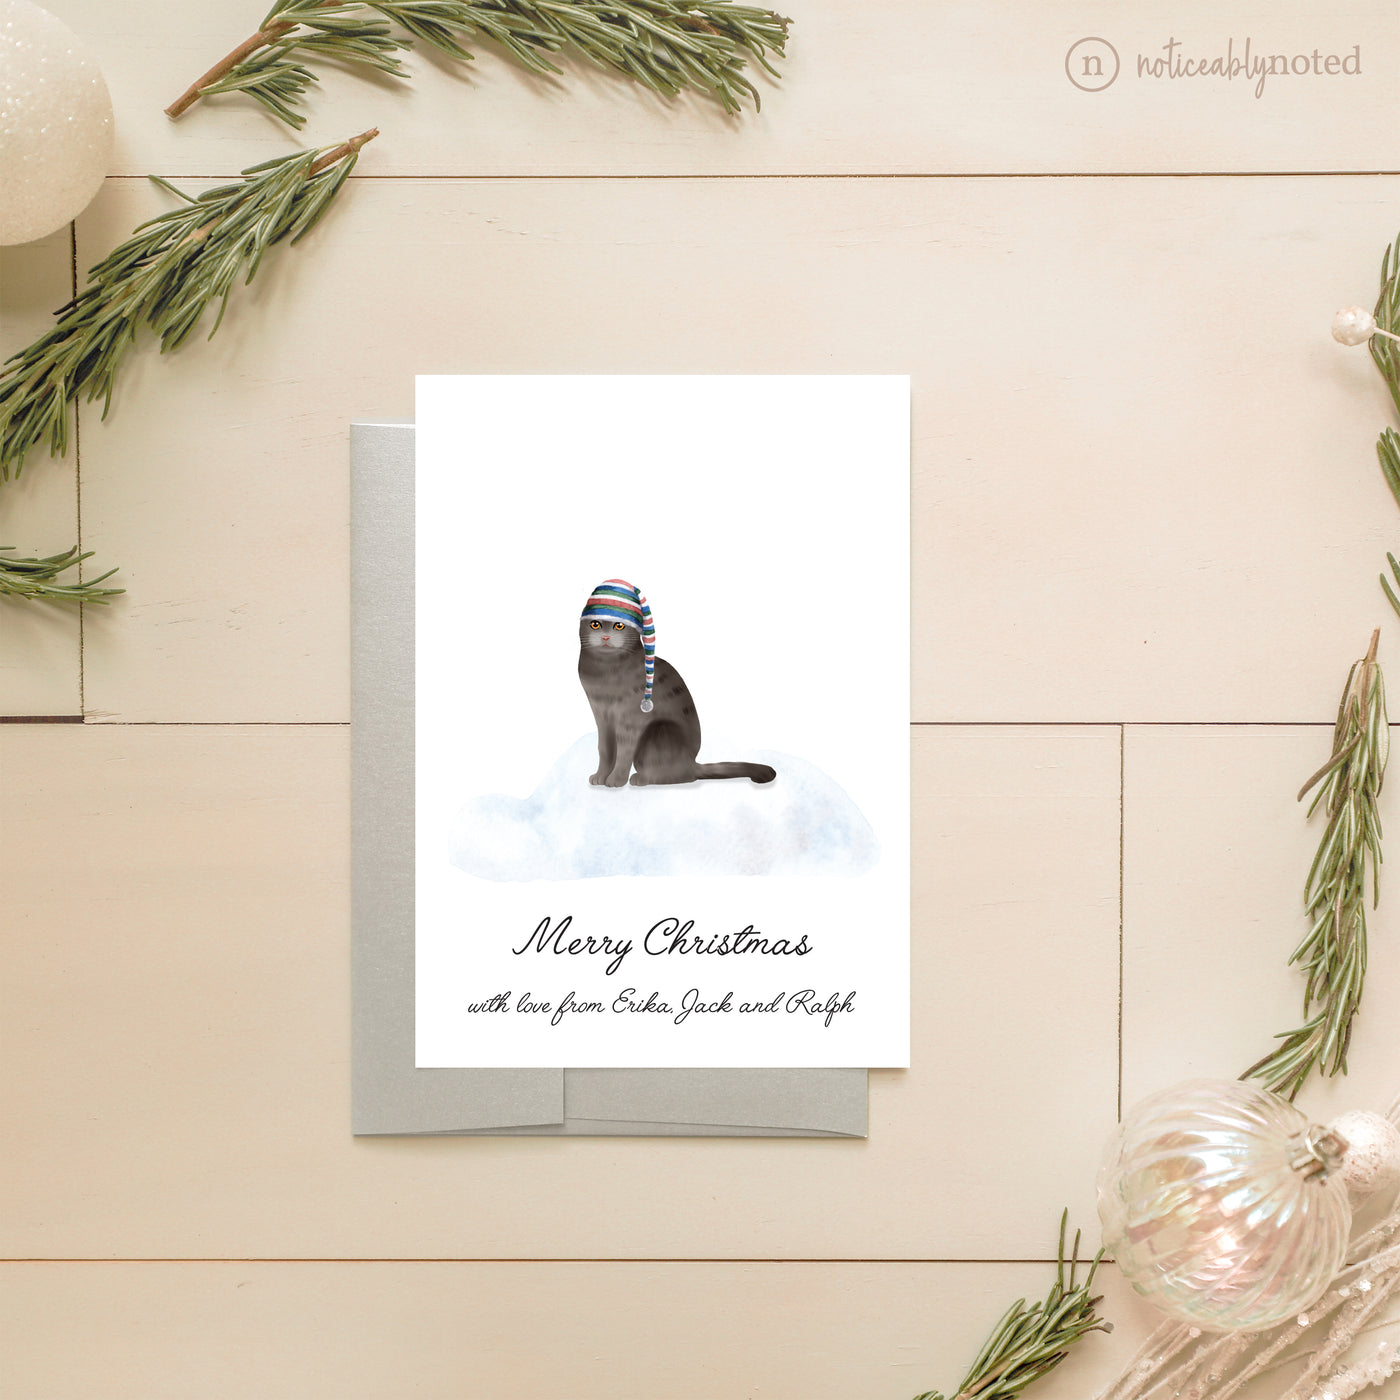 Scottish Fold Christmas Cards | Noticeably Noted